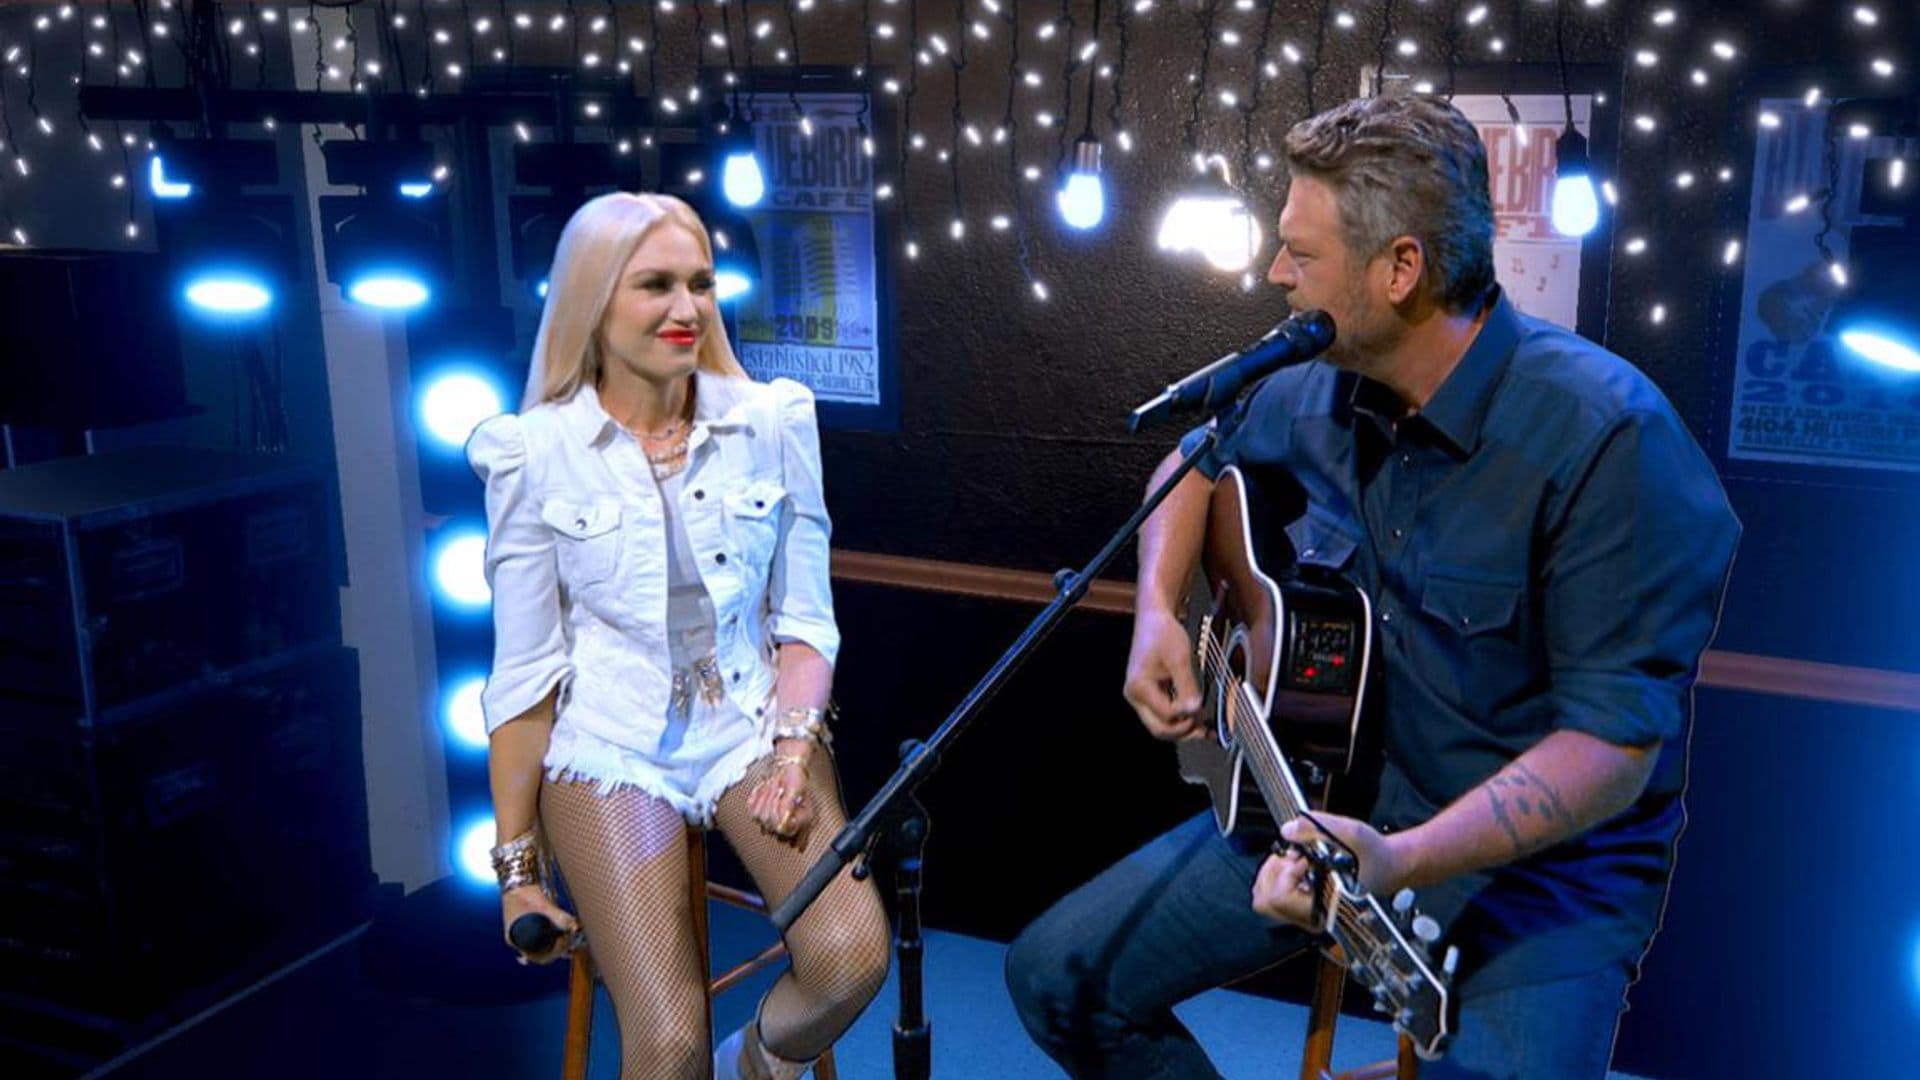 Blake Shelton and Gwen Stefani performed together at the American Country Music Awards